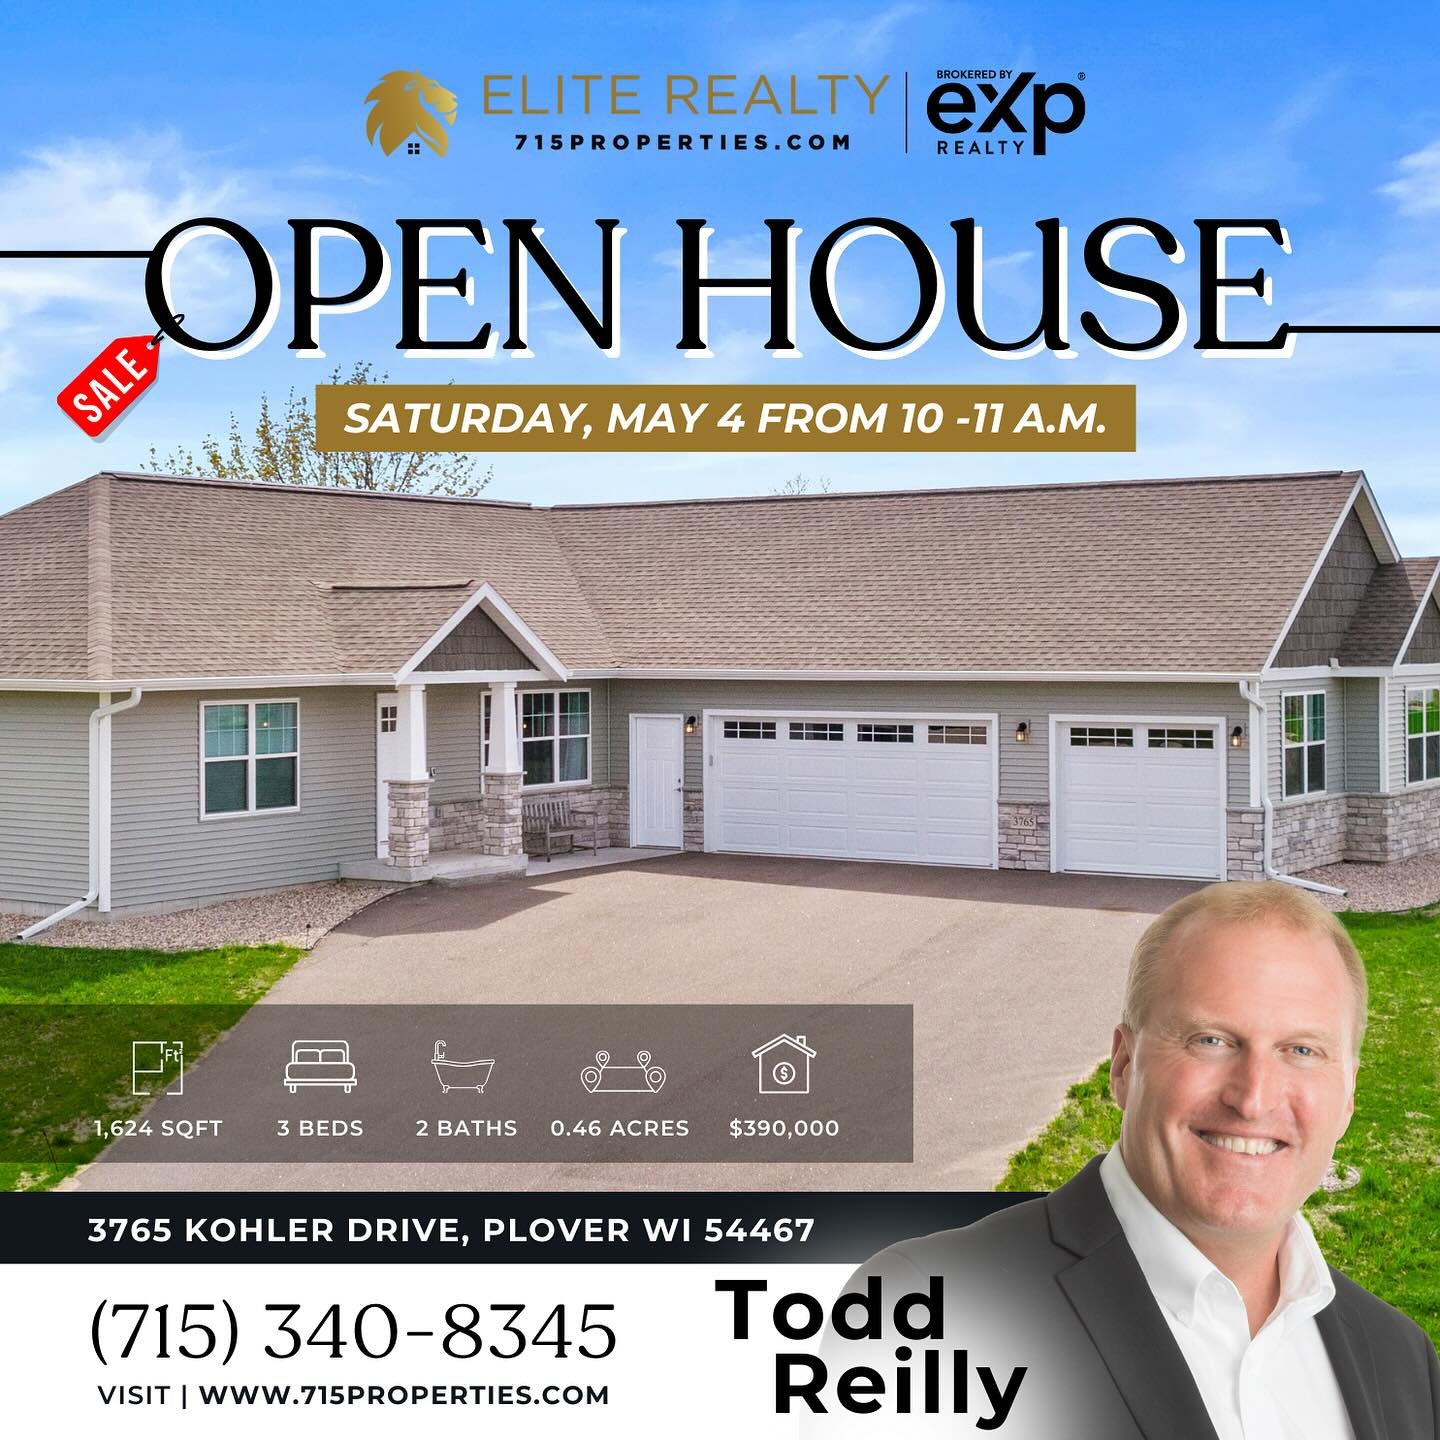 ✨ New Listing Open House ✨ Saturday, May 4, from 10-11 a.m. Welcome to your dream home in Plover&rsquo;s coveted Wood Pointe subdivision! This stunning California split ranch boasts a modern open-concept layout, featuring vaulted ceilings that seamle